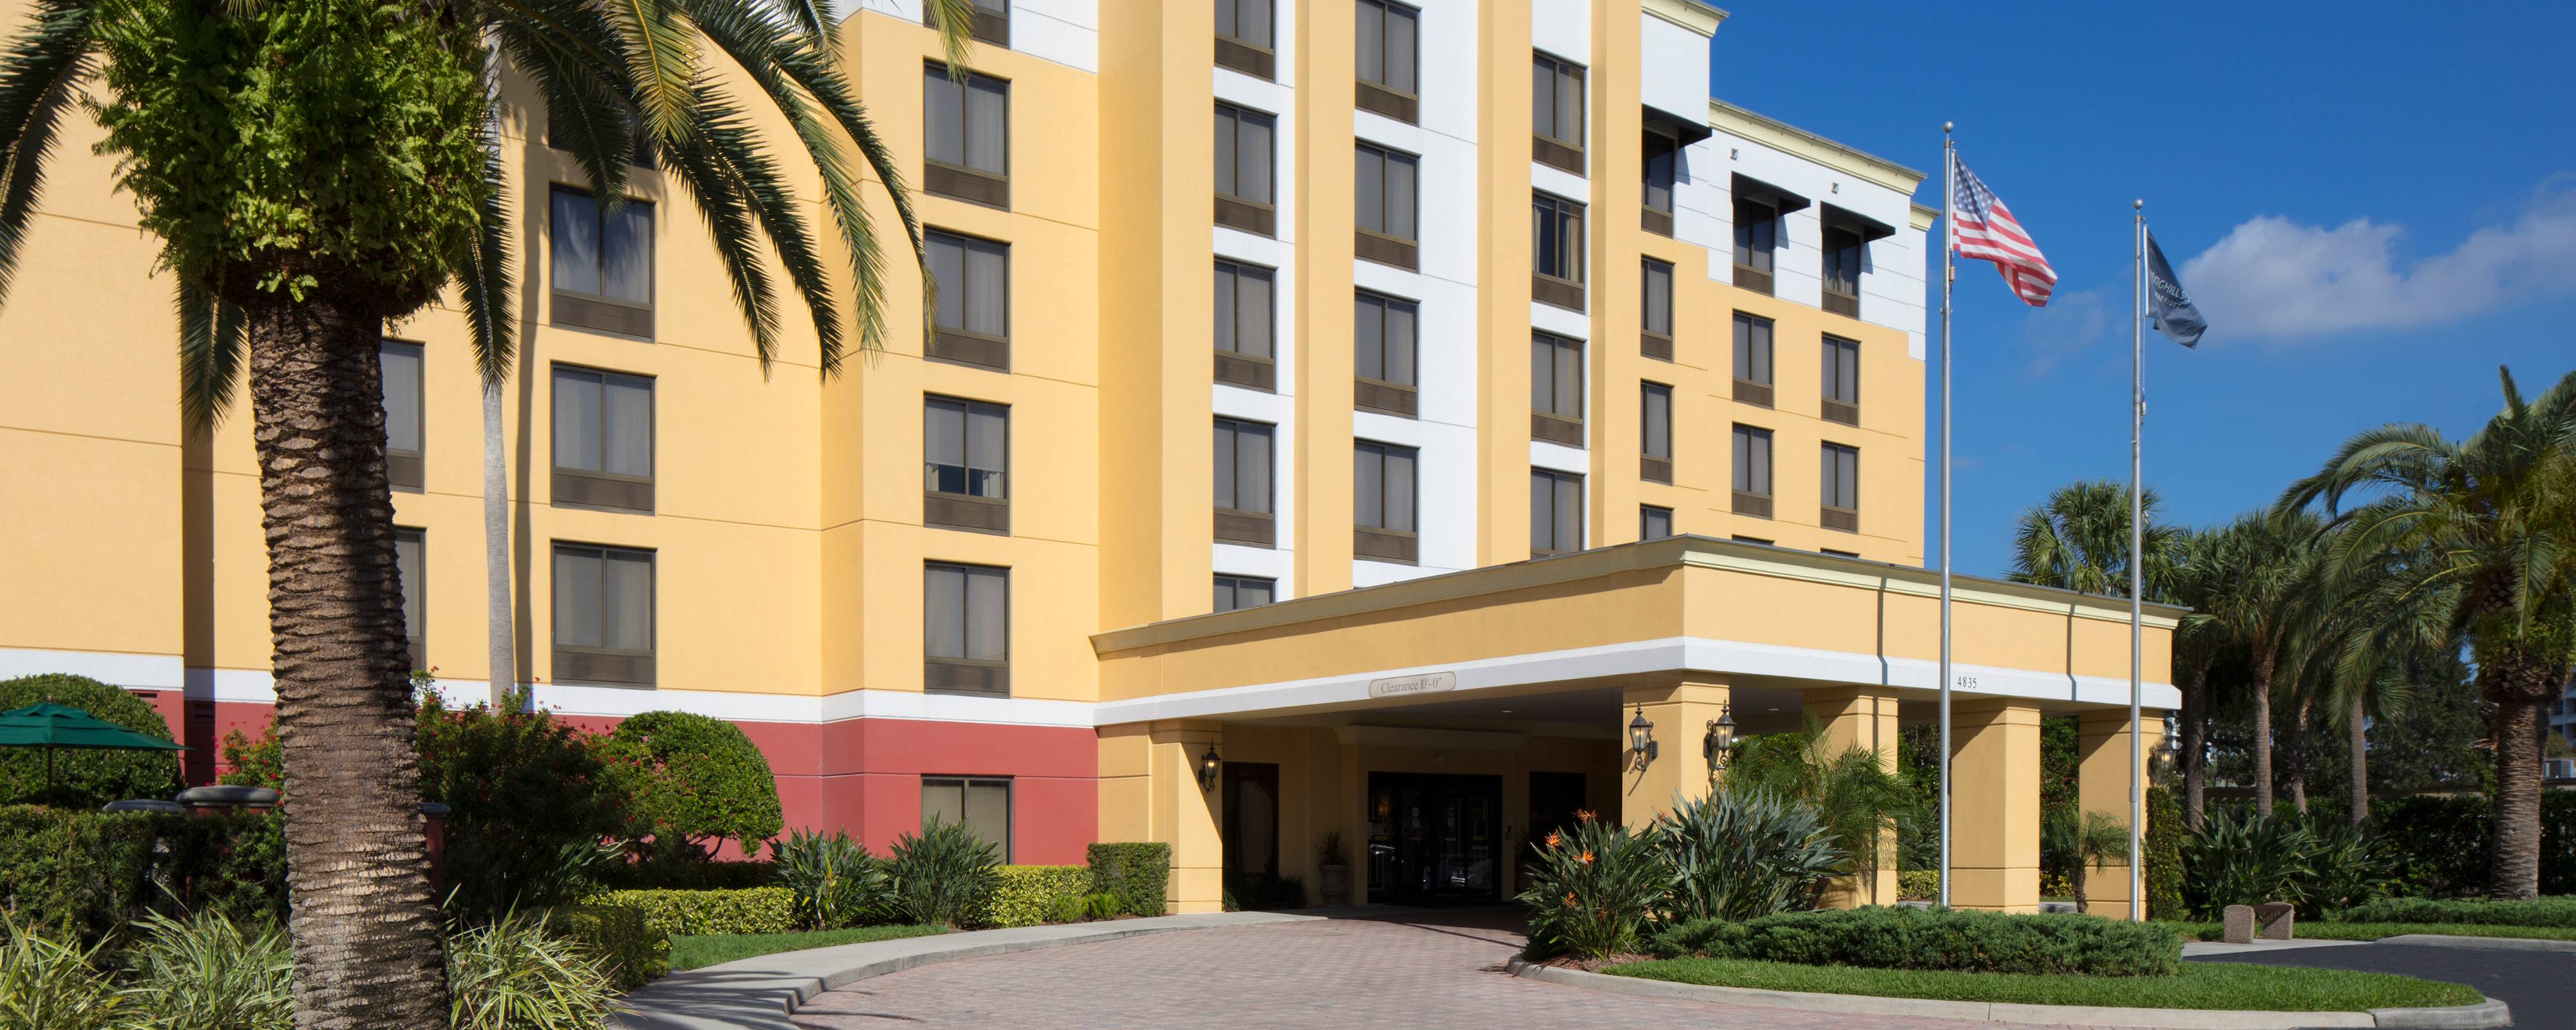 Hotels Near Usf - Map | Springhill Suites Tampa Westshore Airport - Tampa Florida Airport Hotels Map